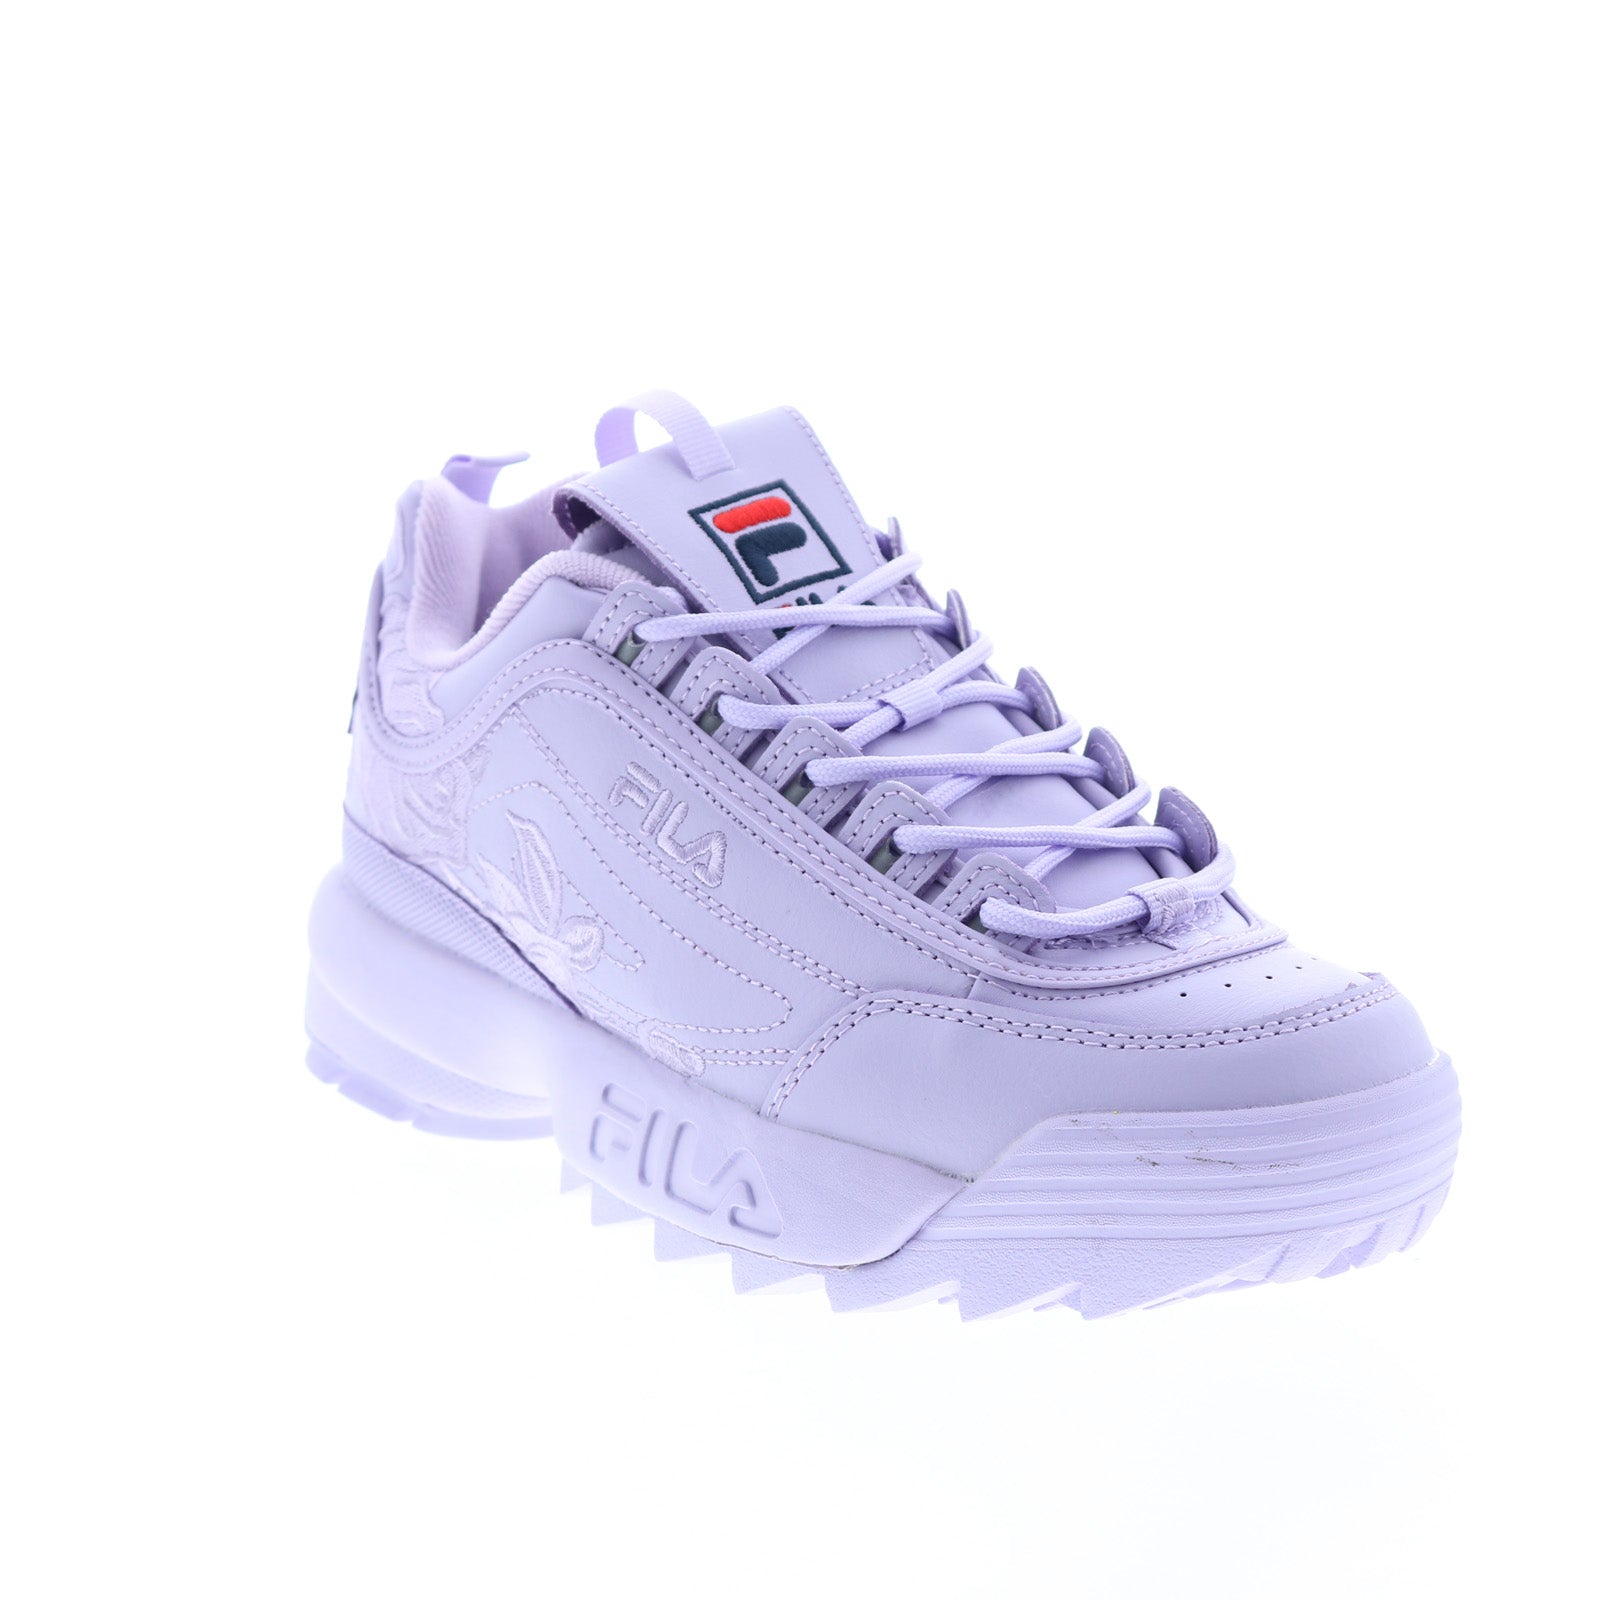 Fila Disruptor II Embroidery Womens Leather Sneakers Ruze Shoes